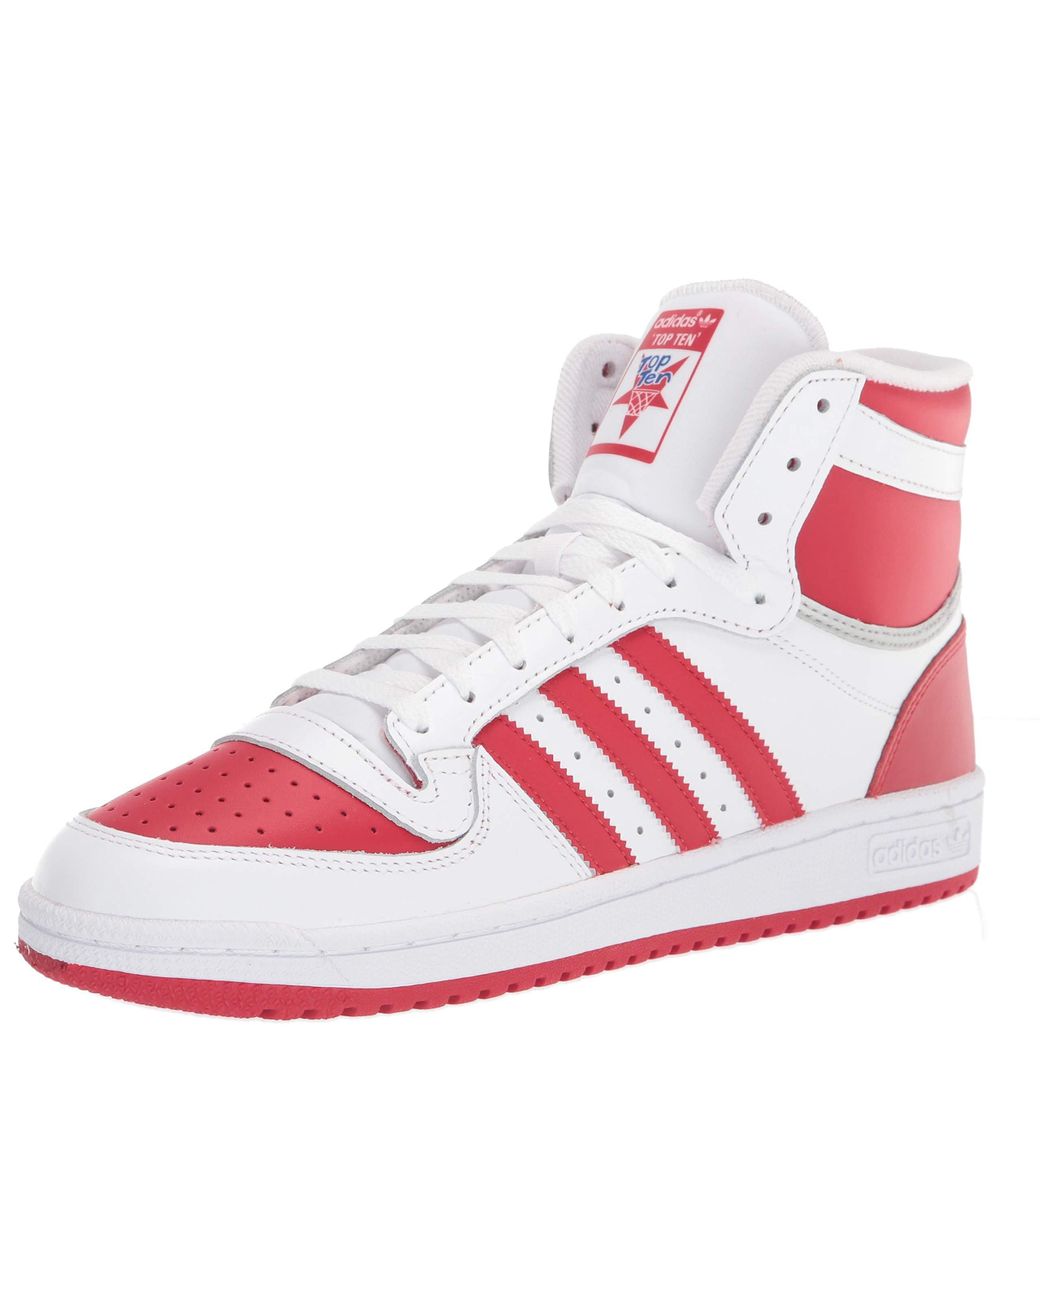 adidas Originals Top Ten Rb Sneaker in White/Scarlet/Silver (White) for ...